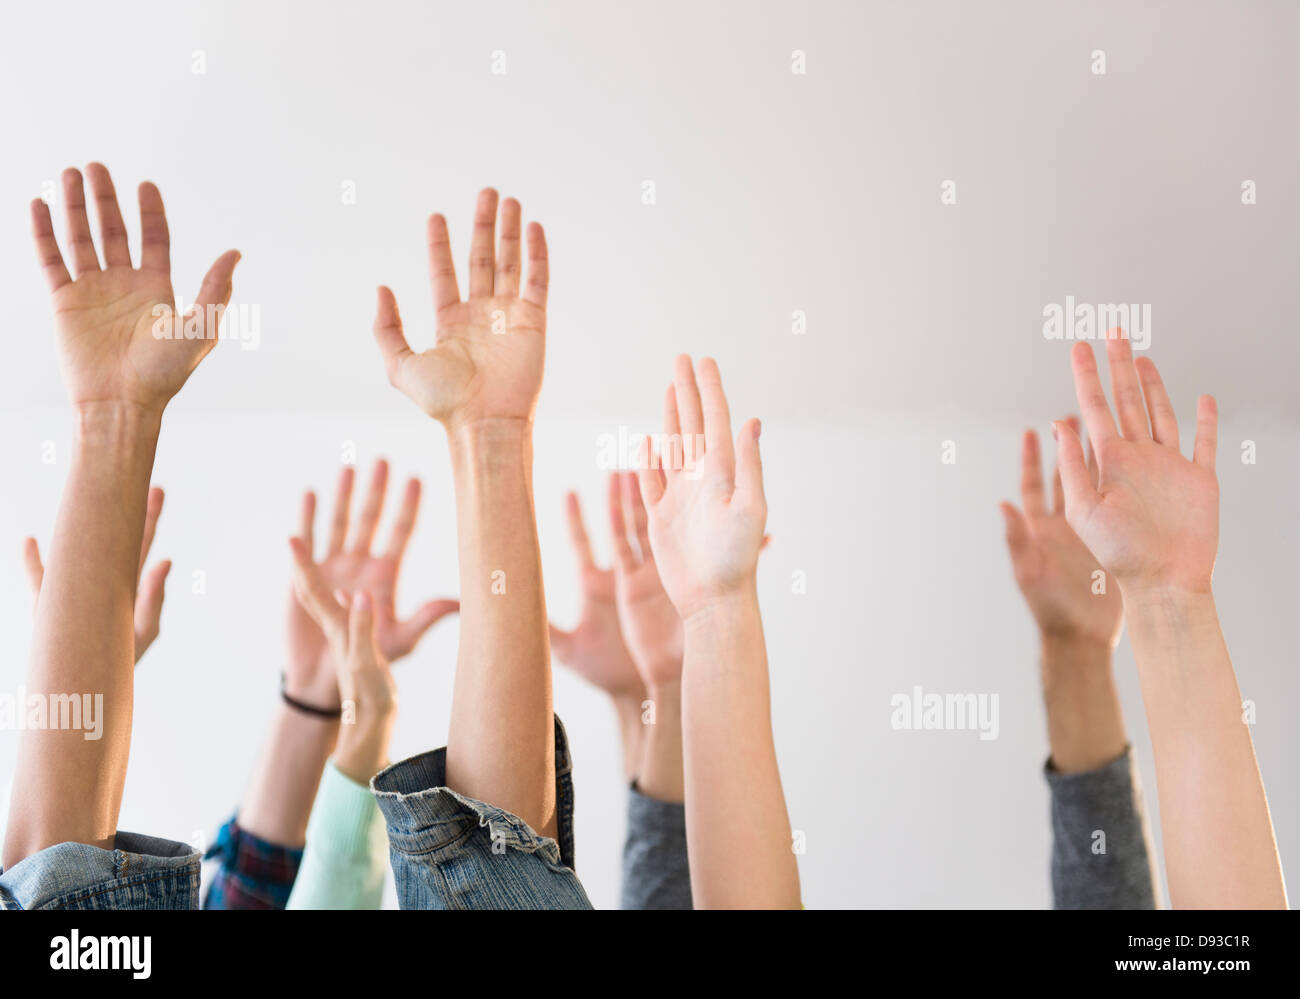 People's hands raised in air Stock Photo